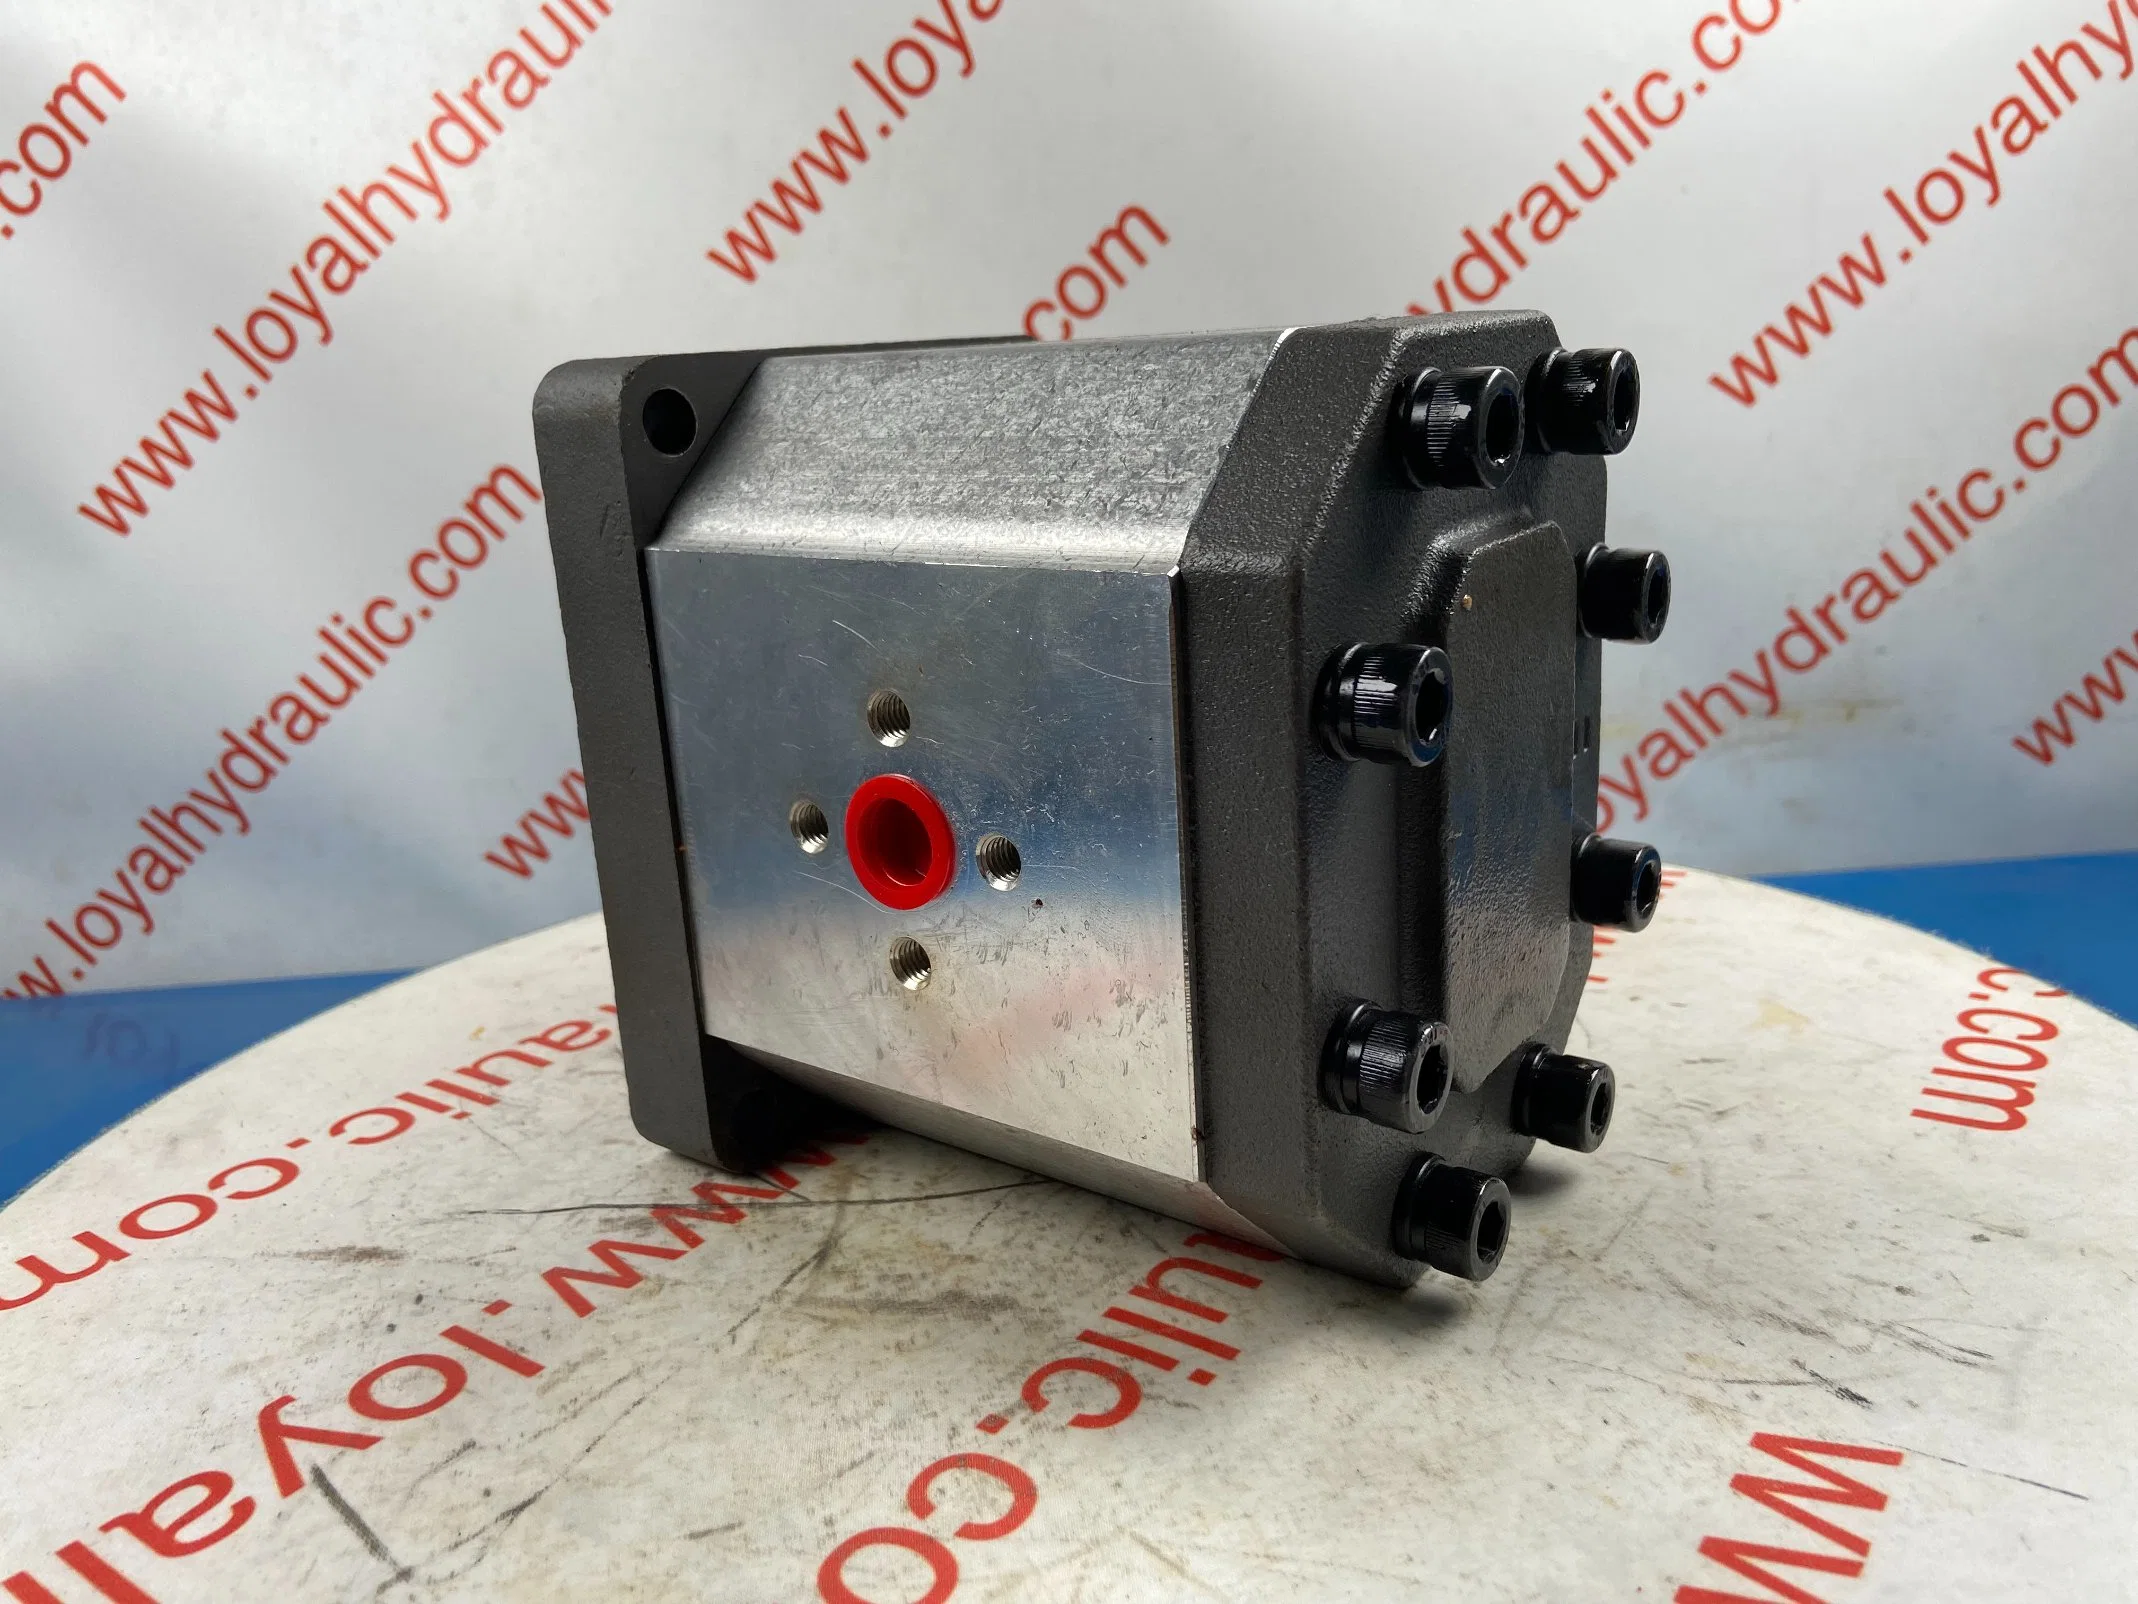 L-Caproni Hydraulic Gear Pump 20A19/20c19/20A22/20c22/A48/C48 for Forklift, Crawler Excavator, Agricultural Machinery, Tractor Spare Parts